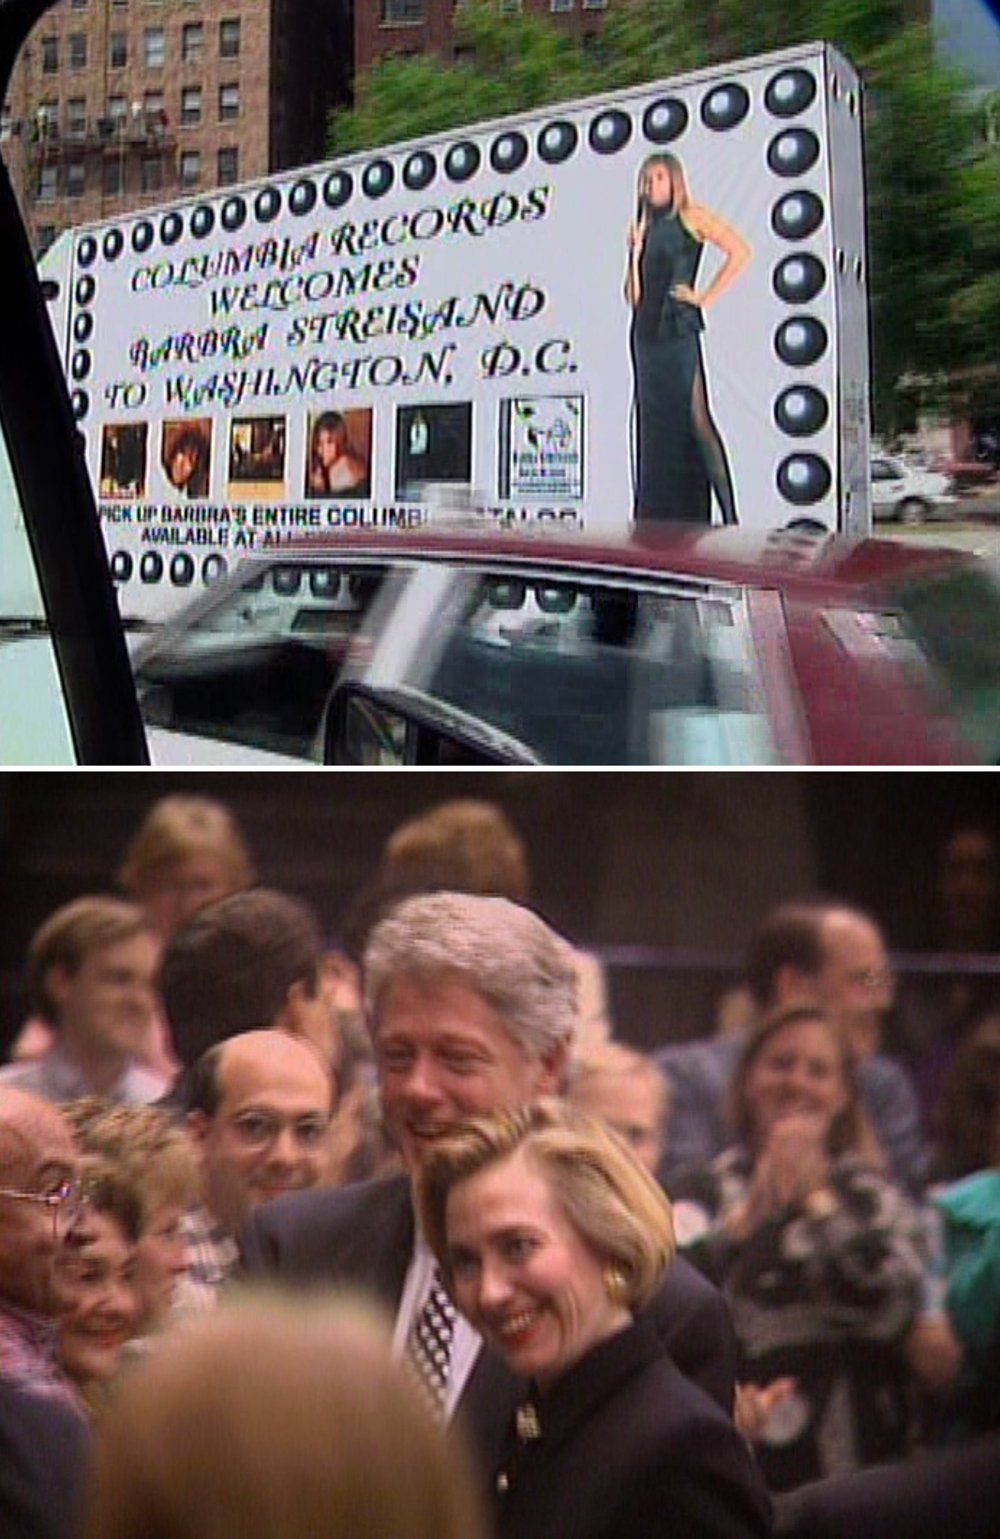 Images of a Columbia Records billboard truck, and the Clintons arriving at Streisand's show.